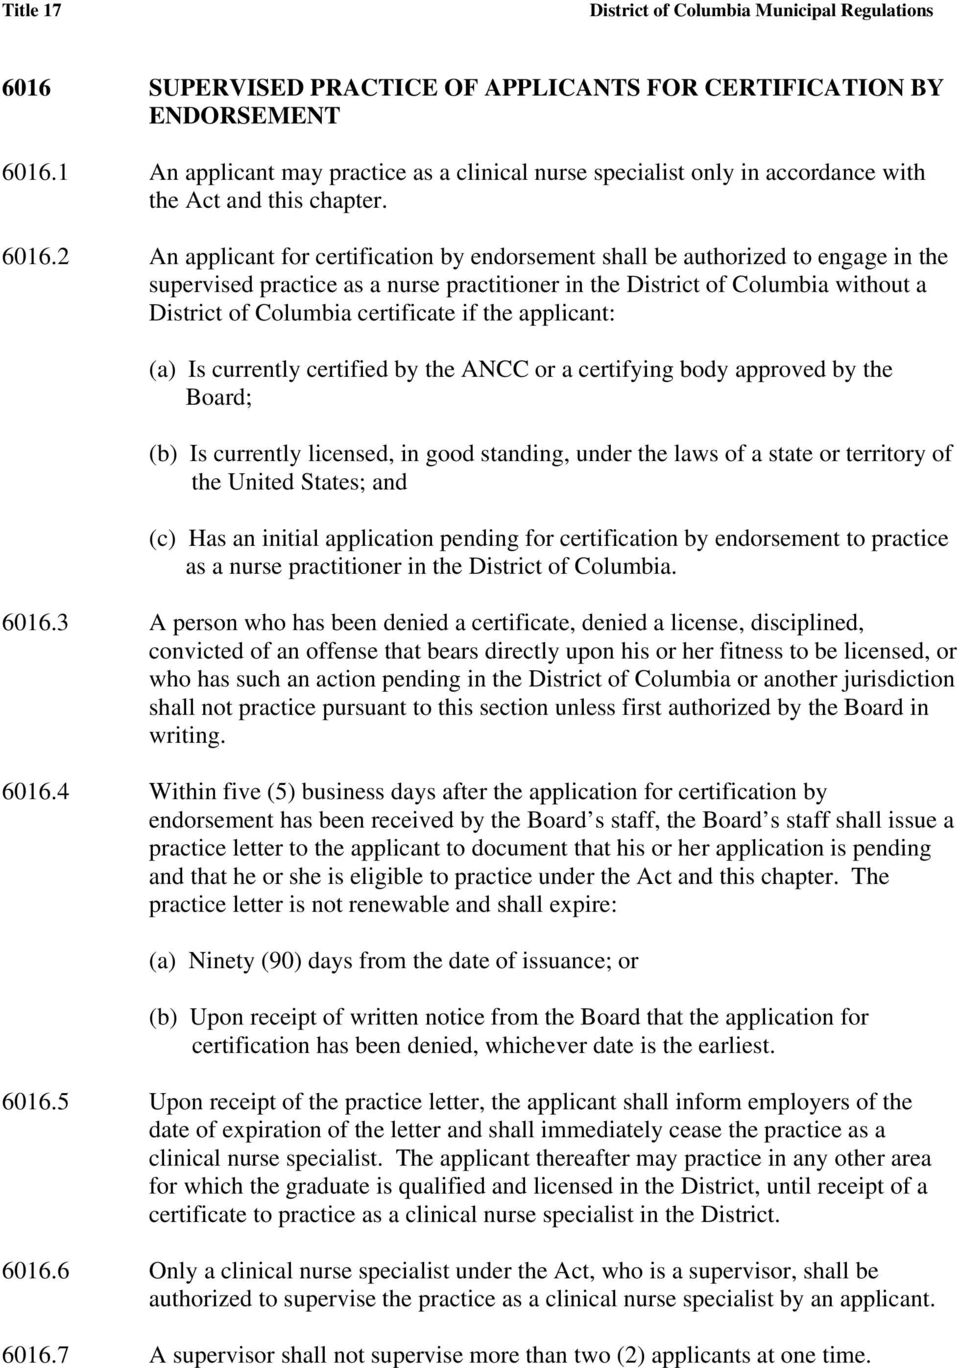 2 An applicant for certification by endorsement shall be authorized to engage in the supervised practice as a nurse practitioner in the District of Columbia without a District of Columbia certificate